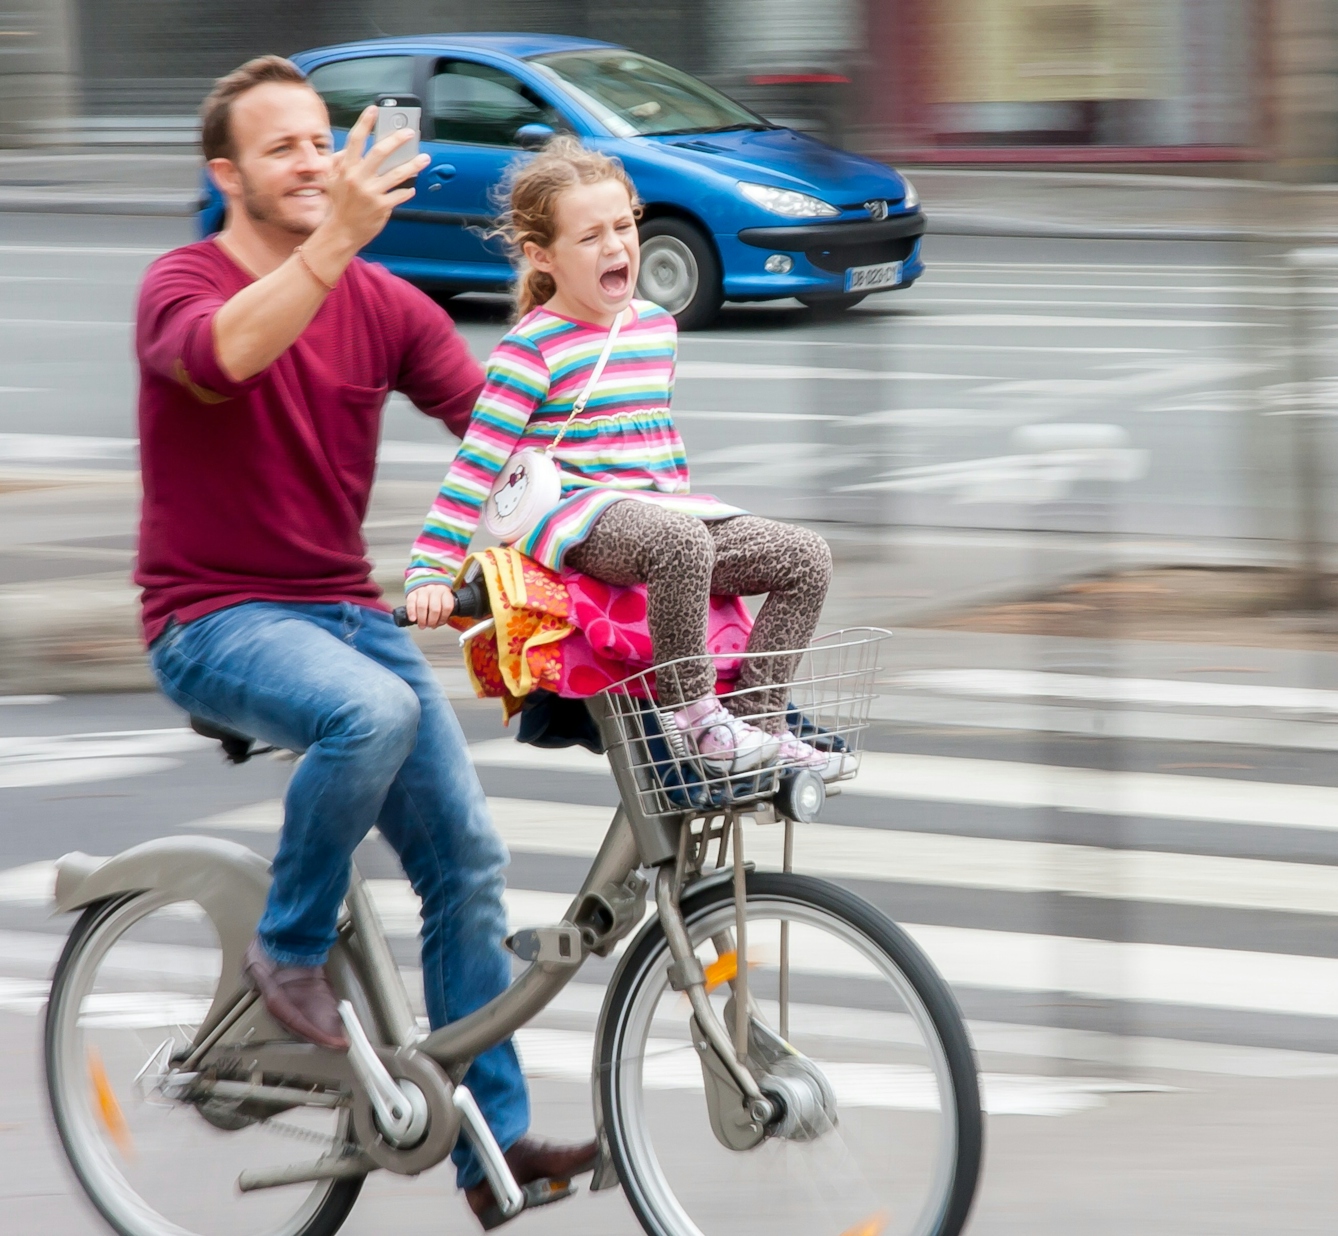 Photograph of a man riding a bicycle taking a selfie whilst the girl sitting on his handlebars appears to be crying or screaming. Blurred background and car behind indicate movement.